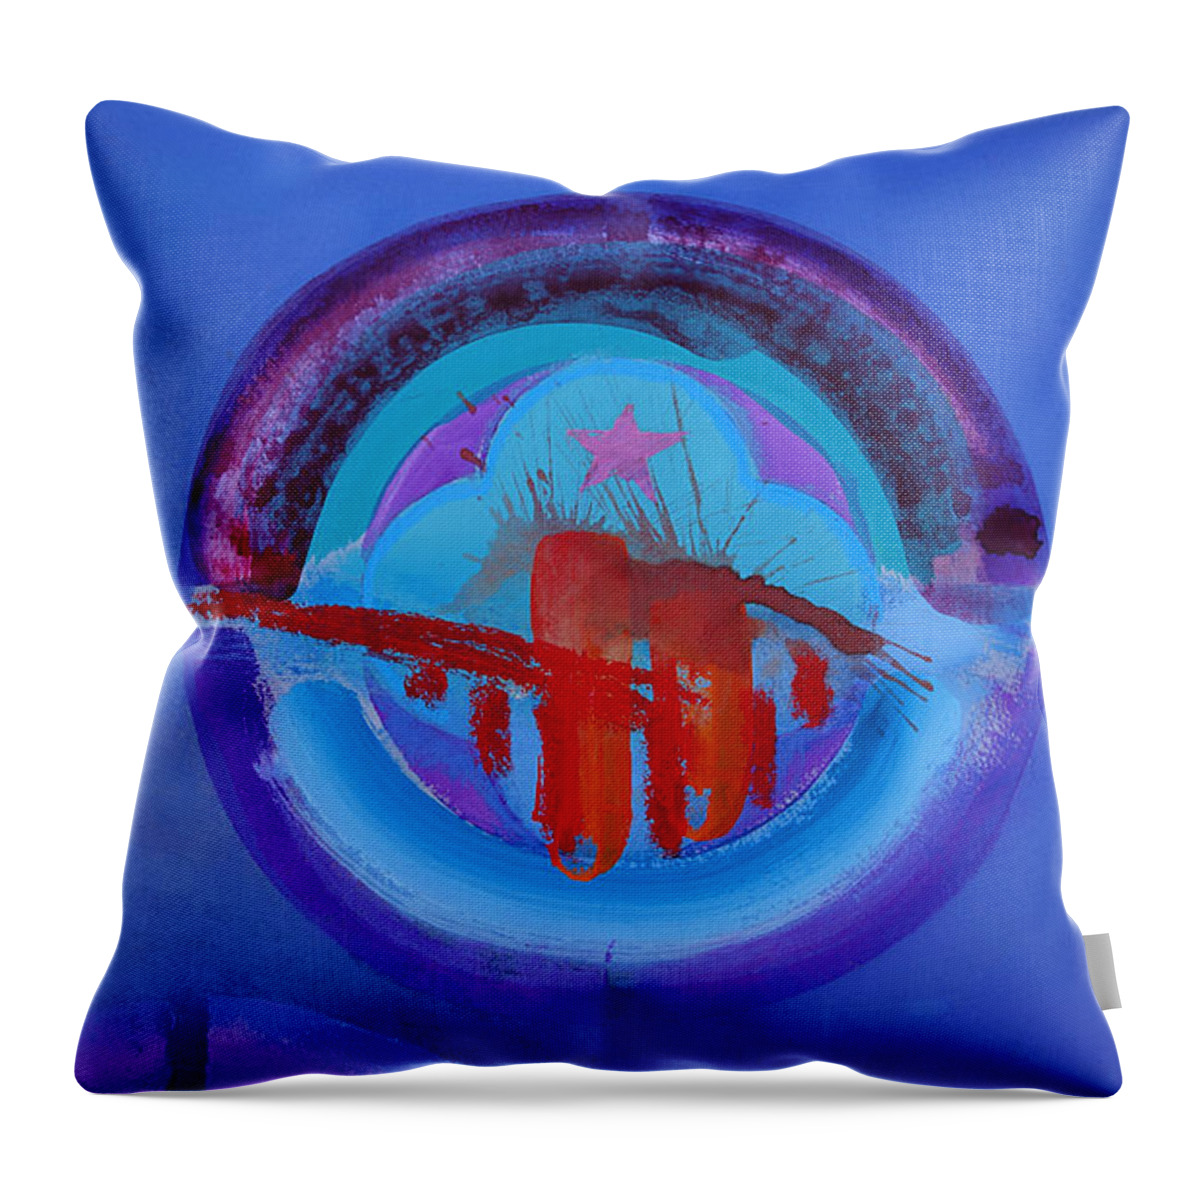 Texas Art Throw Pillow featuring the painting Blue Untitled Image by Charles Stuart